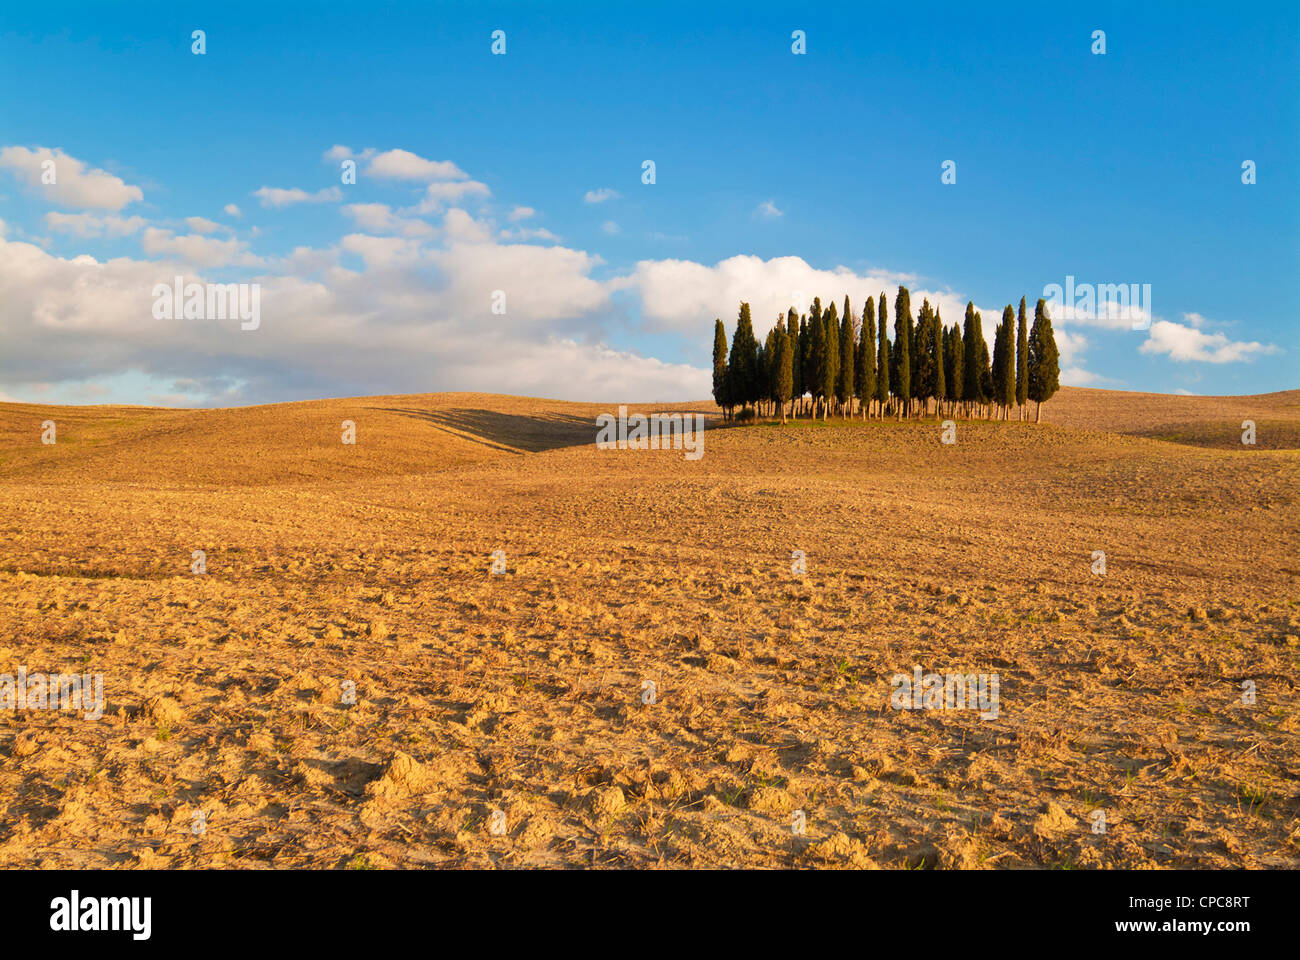 Famous Grove of Cypress trees Val d'Orcia near San Quirico d'Orcia Tuscany Italy EU Europe Stock Photo